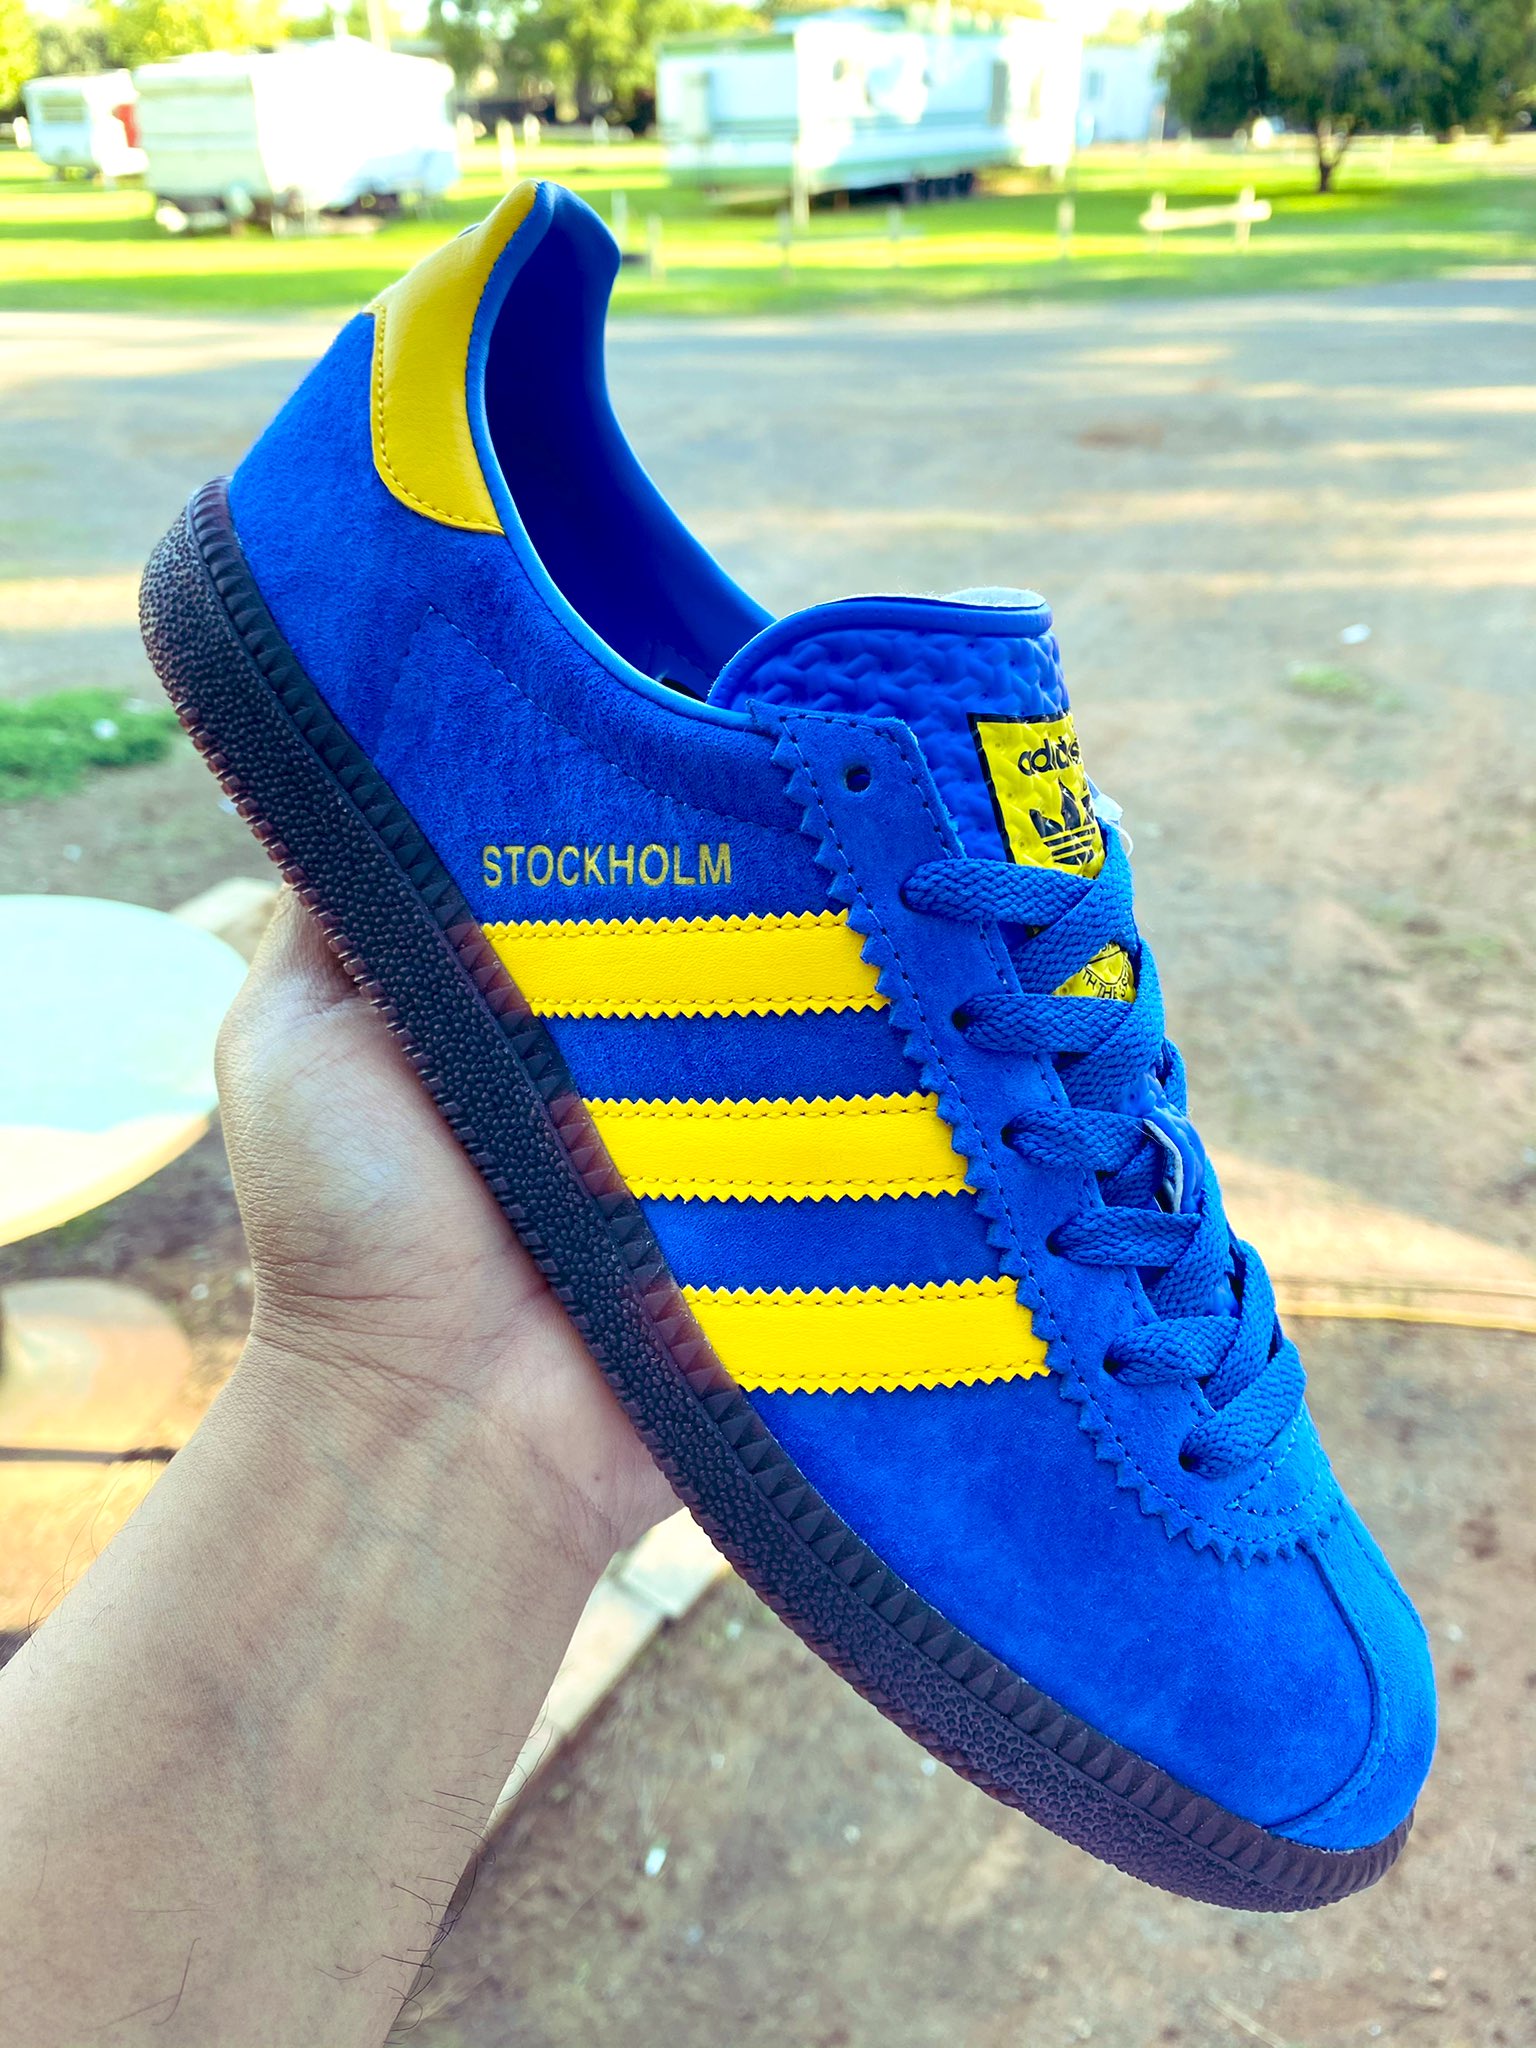 compromiso Marca comercial Cierto Scott McTawetnay on Twitter: "Adidas Originals Stockholm City Series (2014)  #adidasoriginals #adidasstockholm #cityseries #Adifamily #trainers #adidas  https://t.co/3OM1dwfF2e" / Twitter